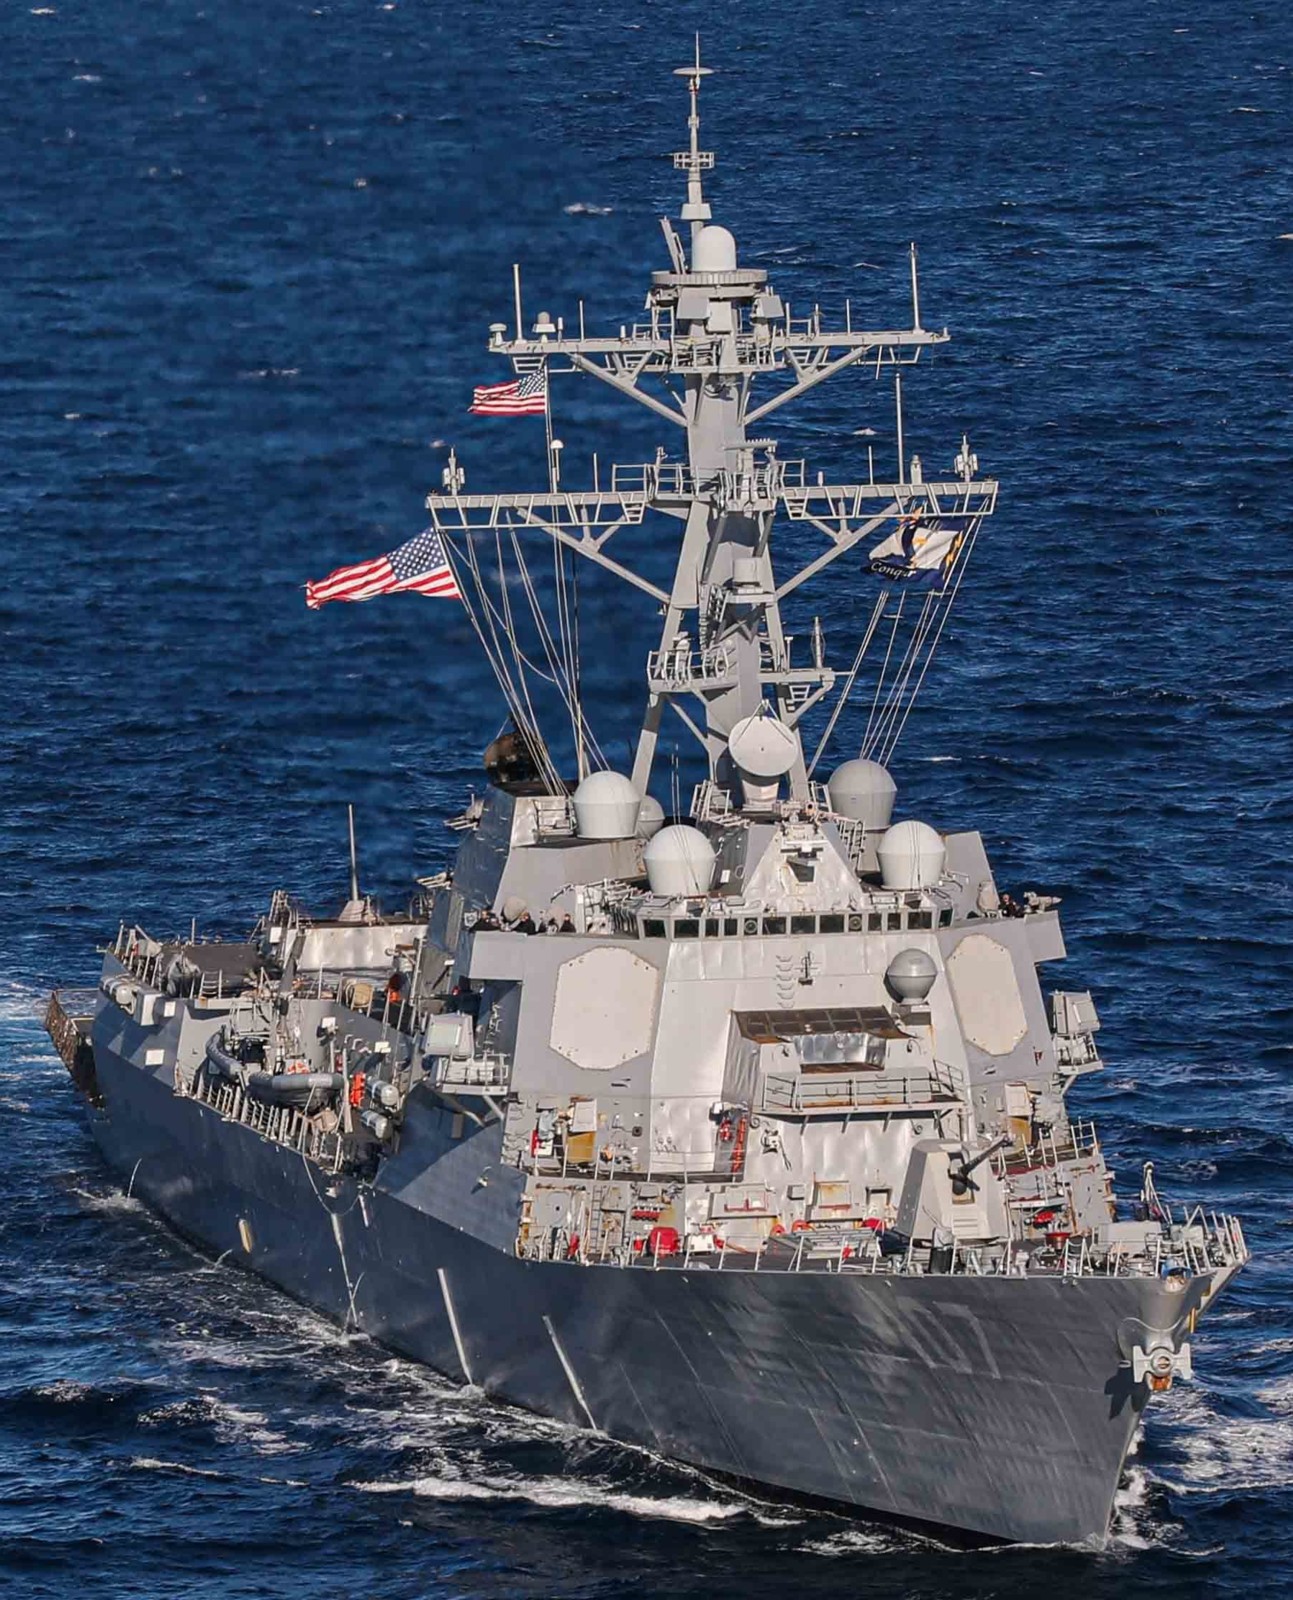 ddg-107 uss gravely arleigh burke class guided missile destroyer aegis us navy adriatic sea 56